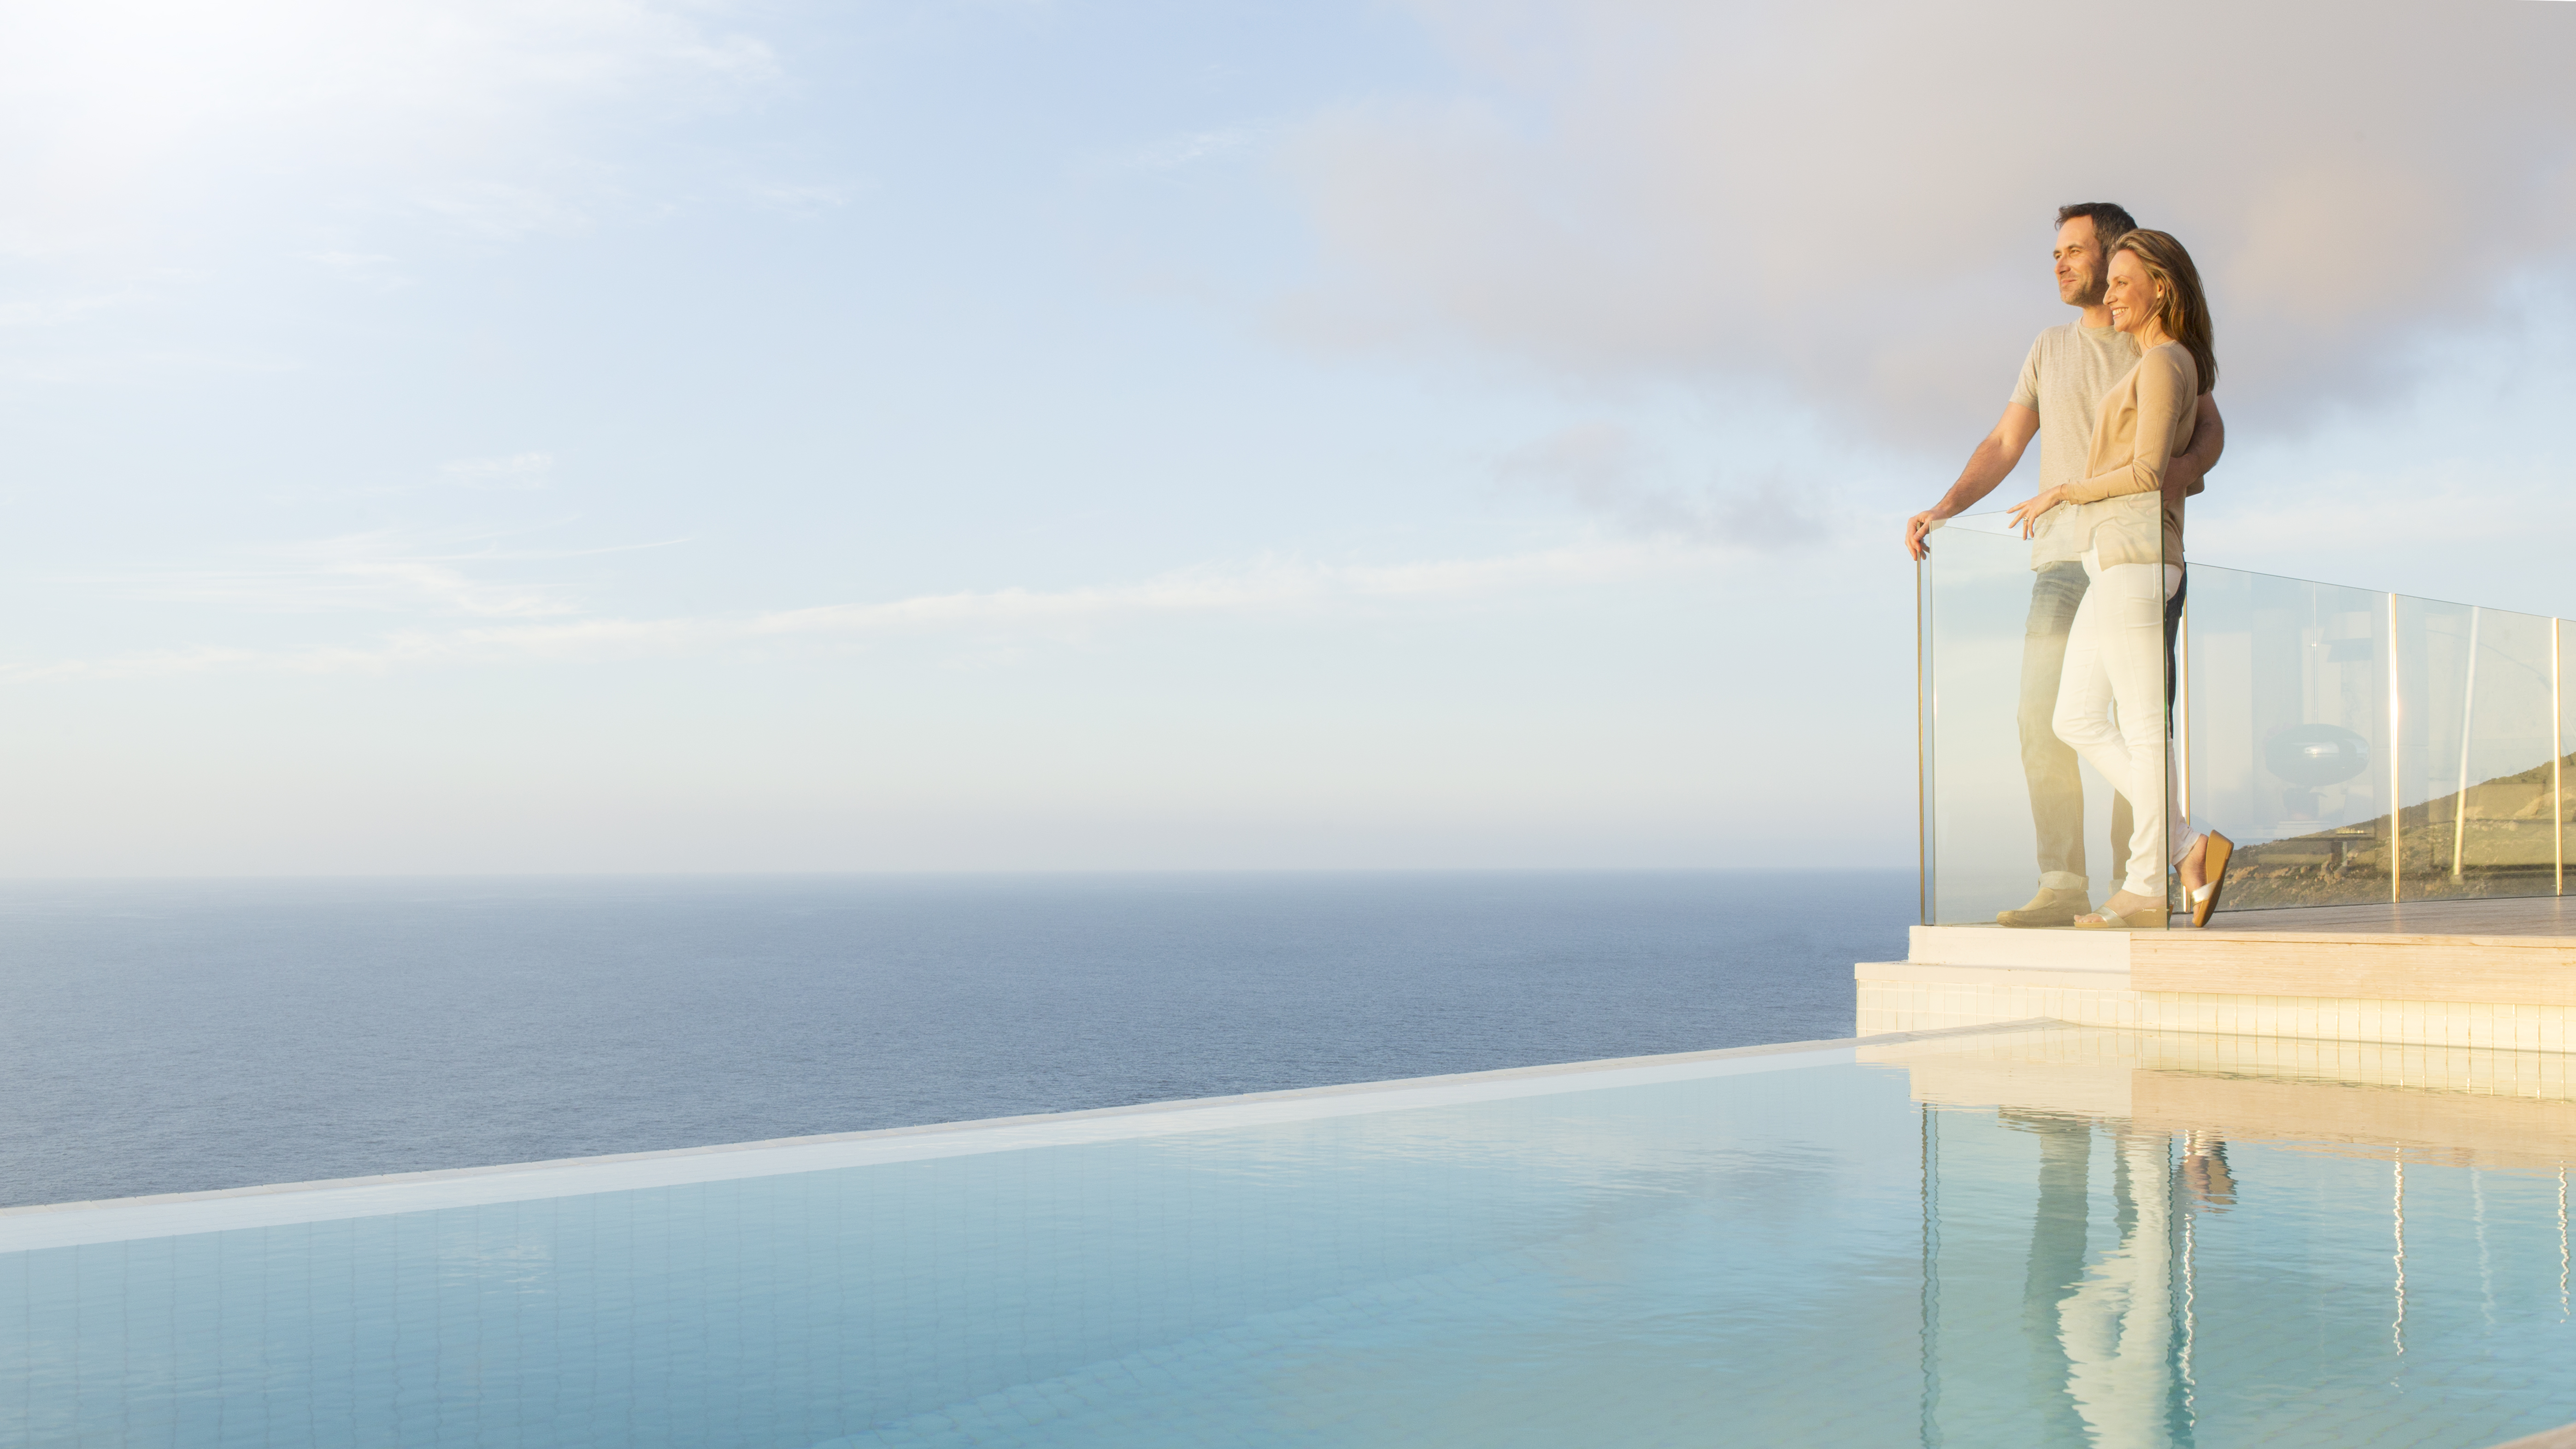 Couple overlooking ocean from modern balcony | Source: Getty Images